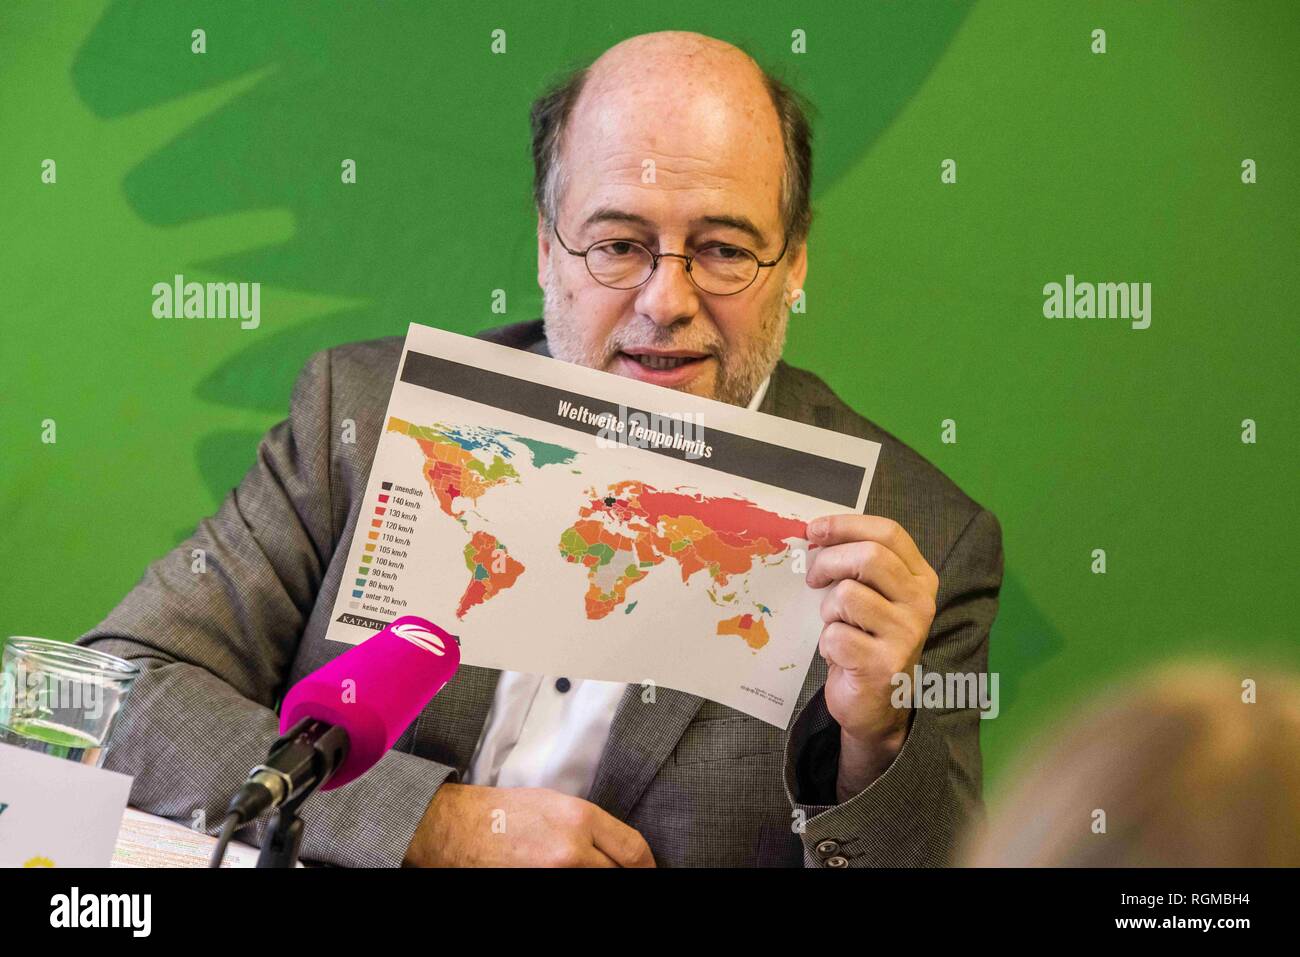 Munich, Bavaria, Germany. 30th Jan, 2019. EIKE HALLITZKY Landesvorsitzende of the Green Party holding a map of the countries with speed limits (Tempolimits). The Bavarian Green Party presented Henrike Hahn, their European ParliamentSpitzenkandidat for the upcoming European elections (Europawahl). Hahn is a trained technologist and has lived previously in Detroit and Paris. Her strategies are based on ecological and social criteria and fighting against populism and right extremism. The Greens see the European Union as the greatest peace project of our time, thus they have positioned them Stock Photo